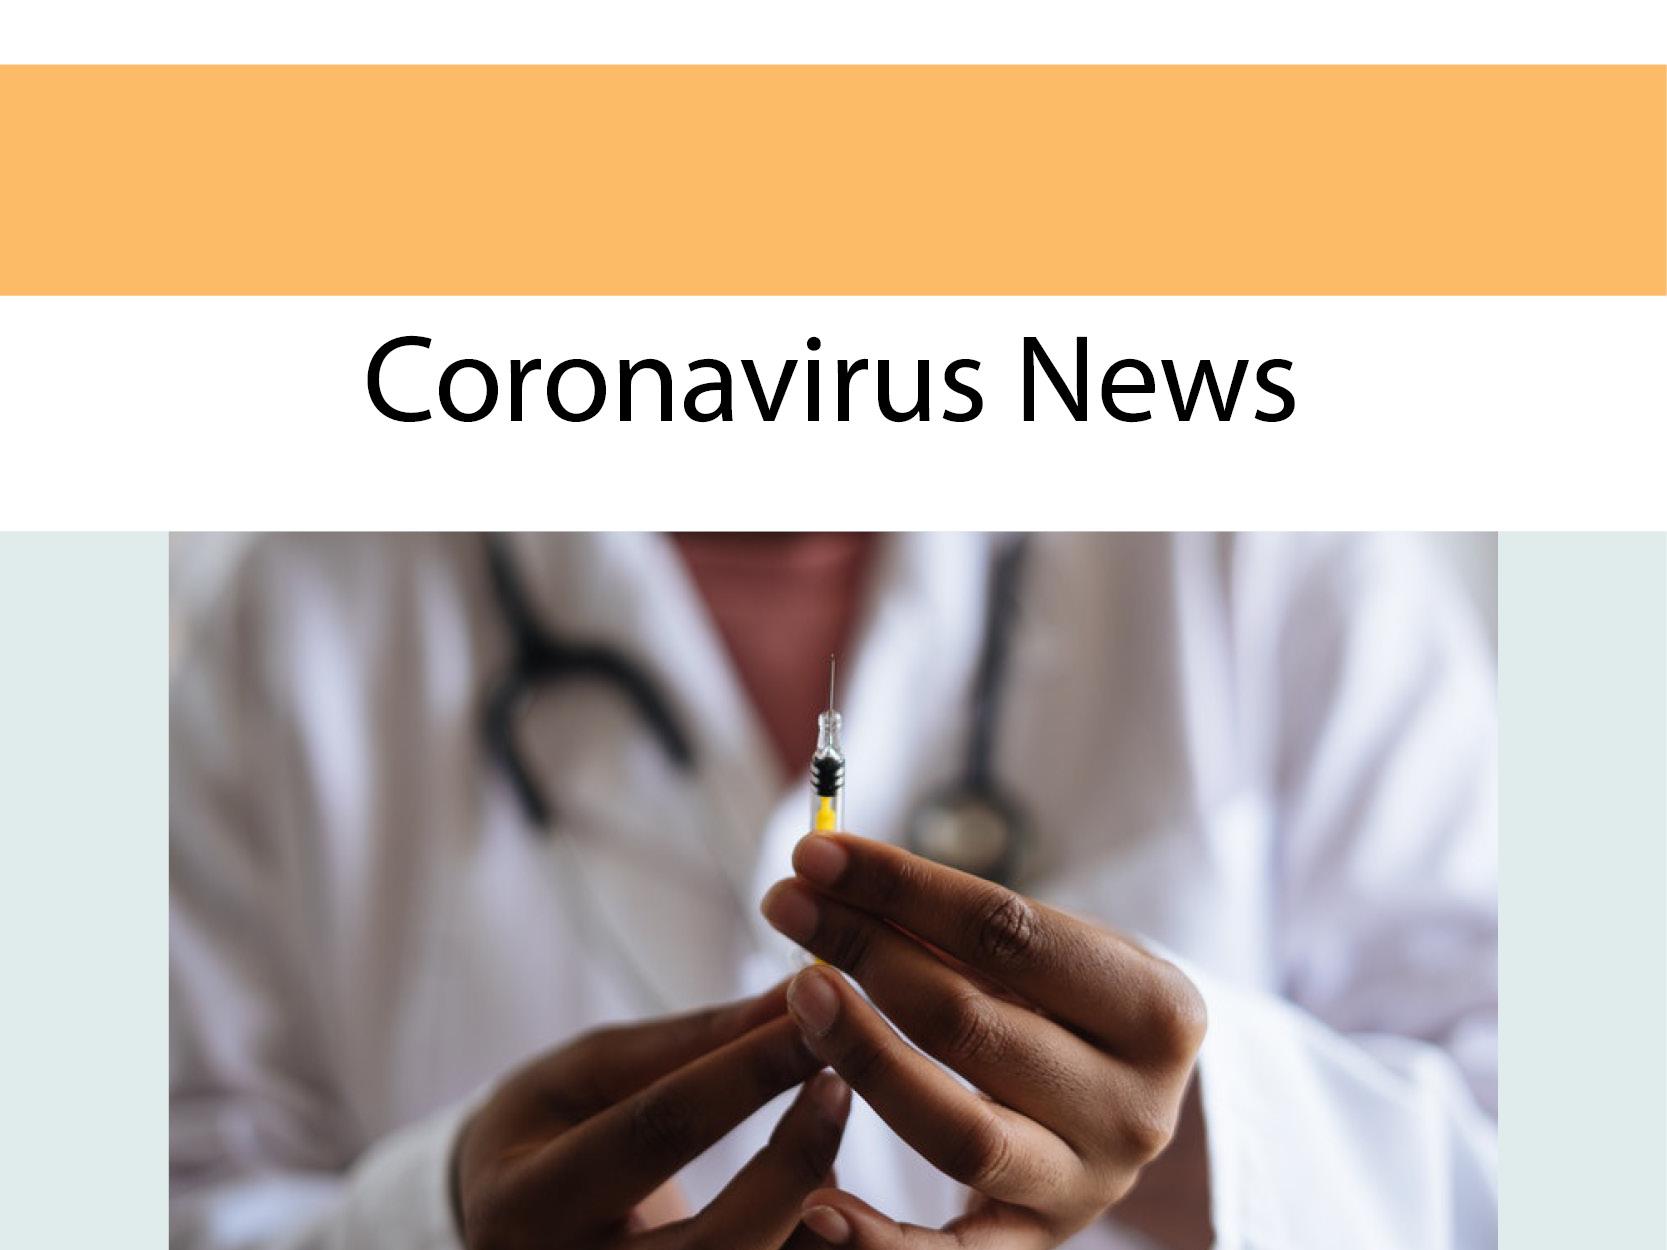 COVID-19 vaccination appointments now available for Laurentides residents aged 85 or greater